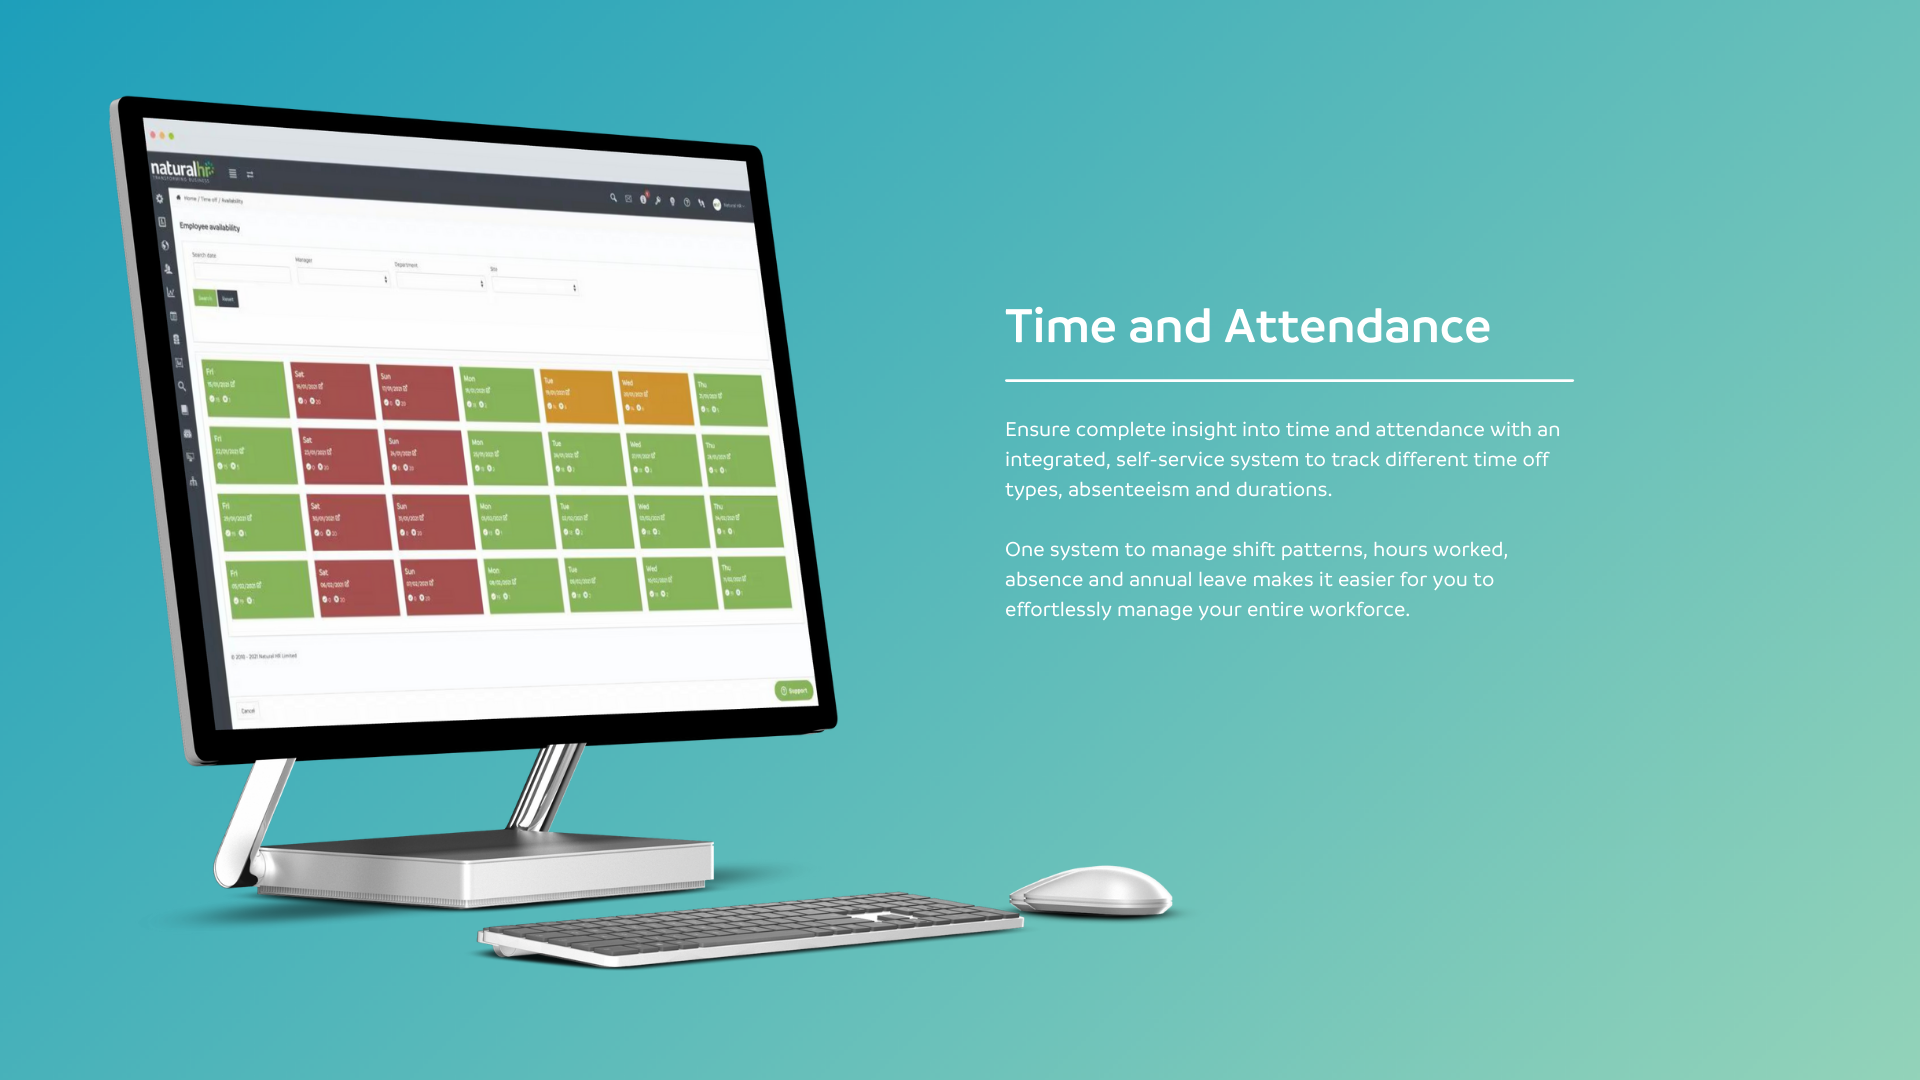 Natural HR Software - Ensure complete insight into time and attendance with an integrated, self-service system to track different time off types, absenteeism and durations.